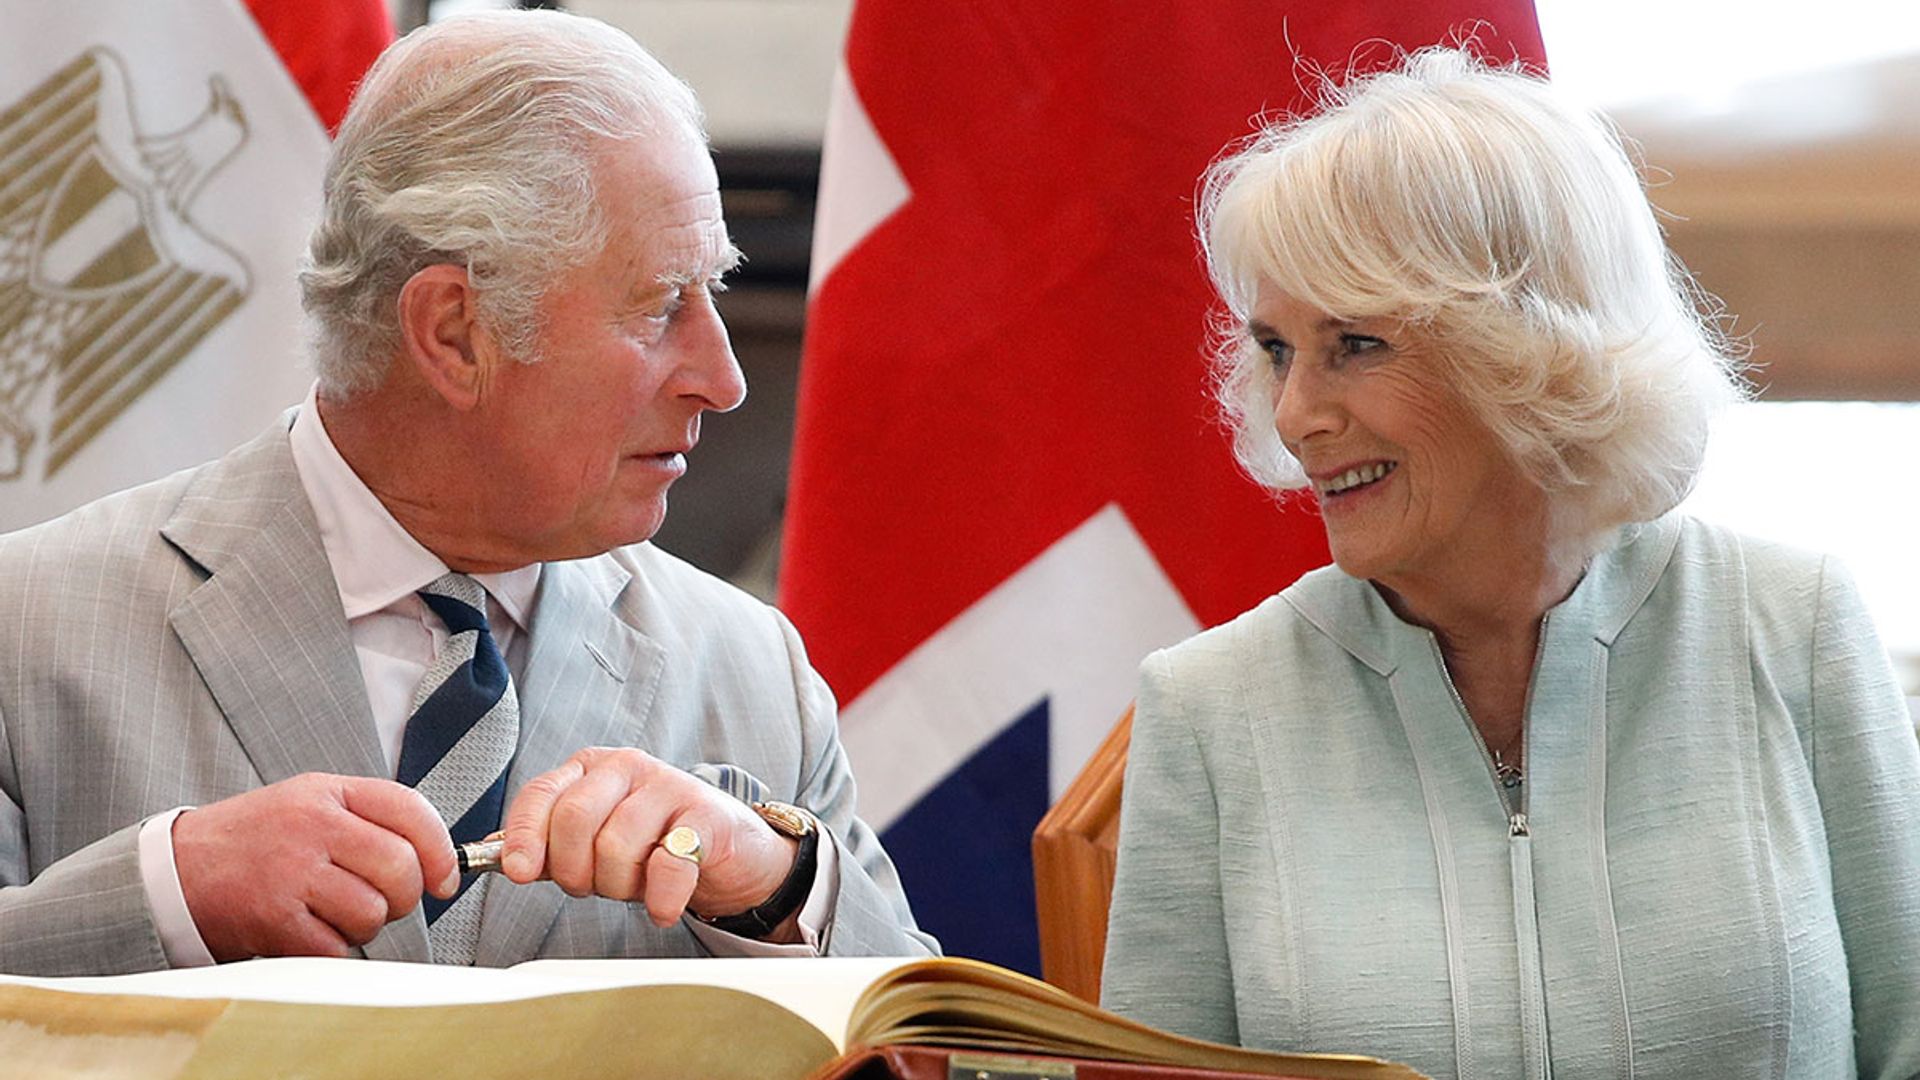 Prince Charles and Duchess Camilla's candid Christmas card photo will melt your heart